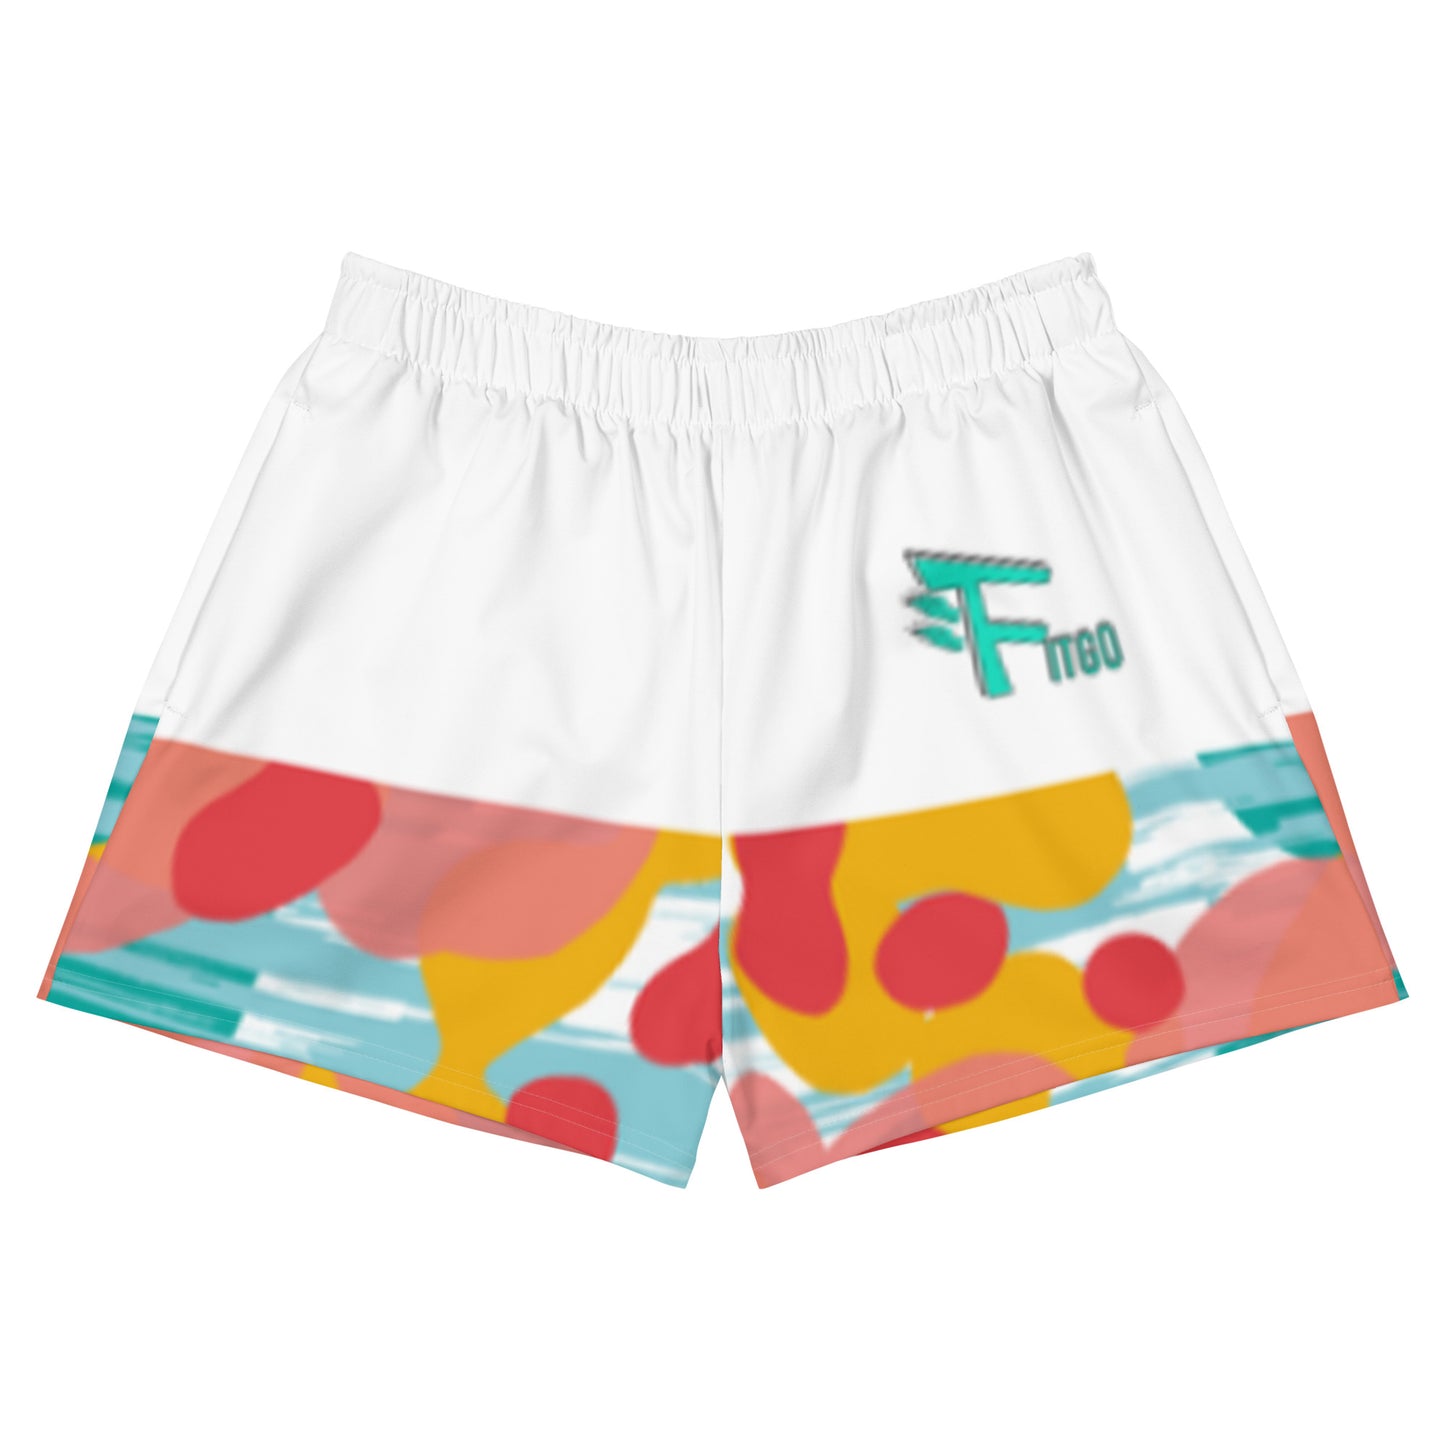 Women's Fitgo Colorful Life Athletic Shorts